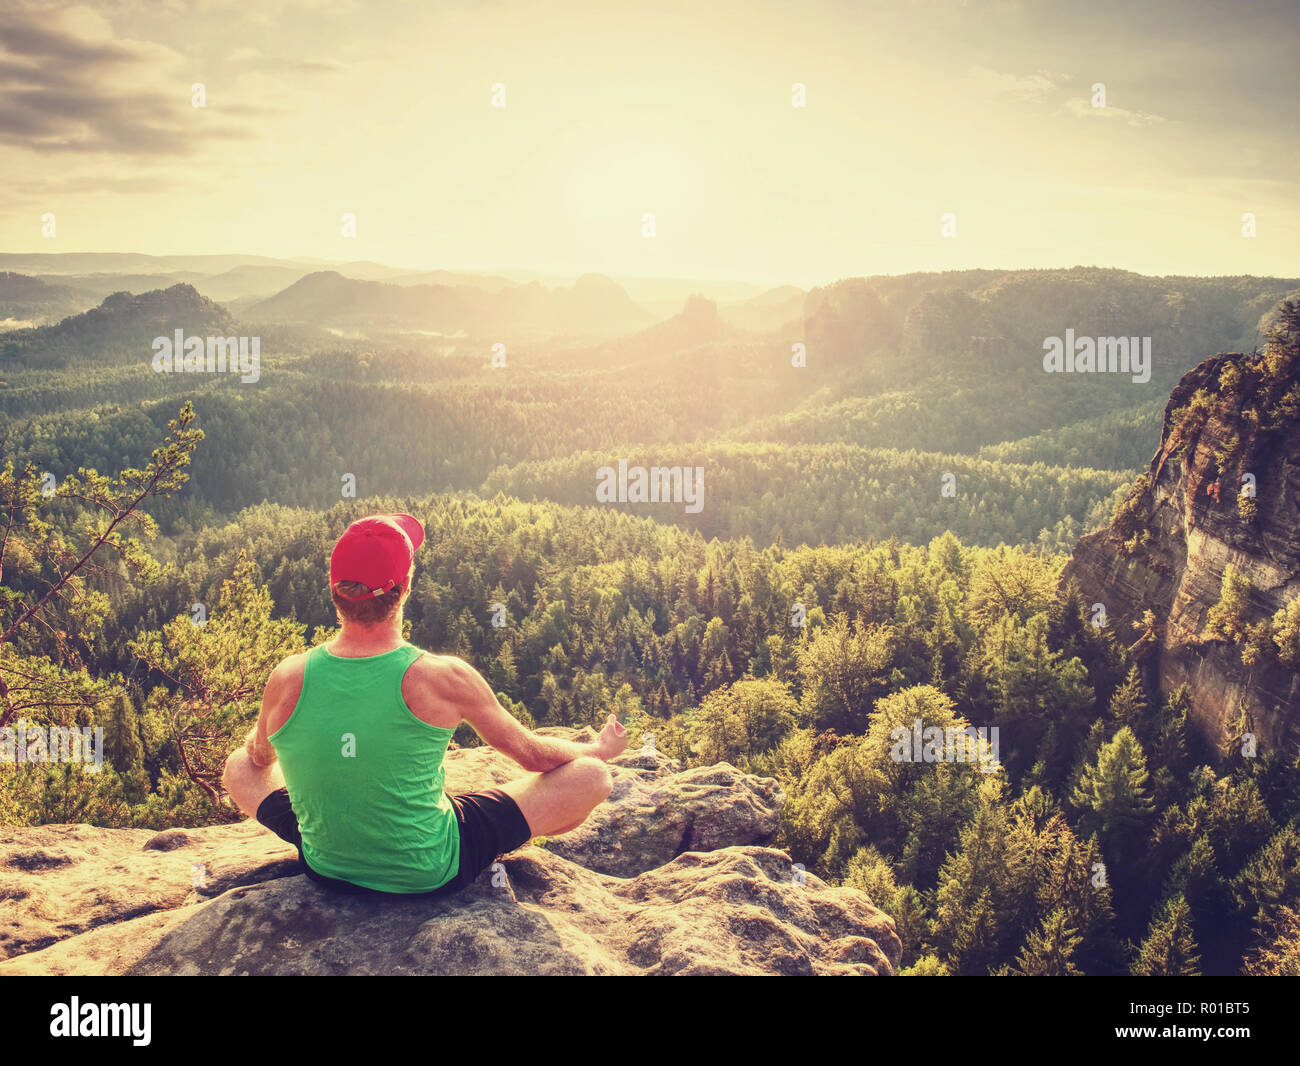 Meditating yoga position on the top of a mountains. Man meditate on mountain at sunrise Stock Photo